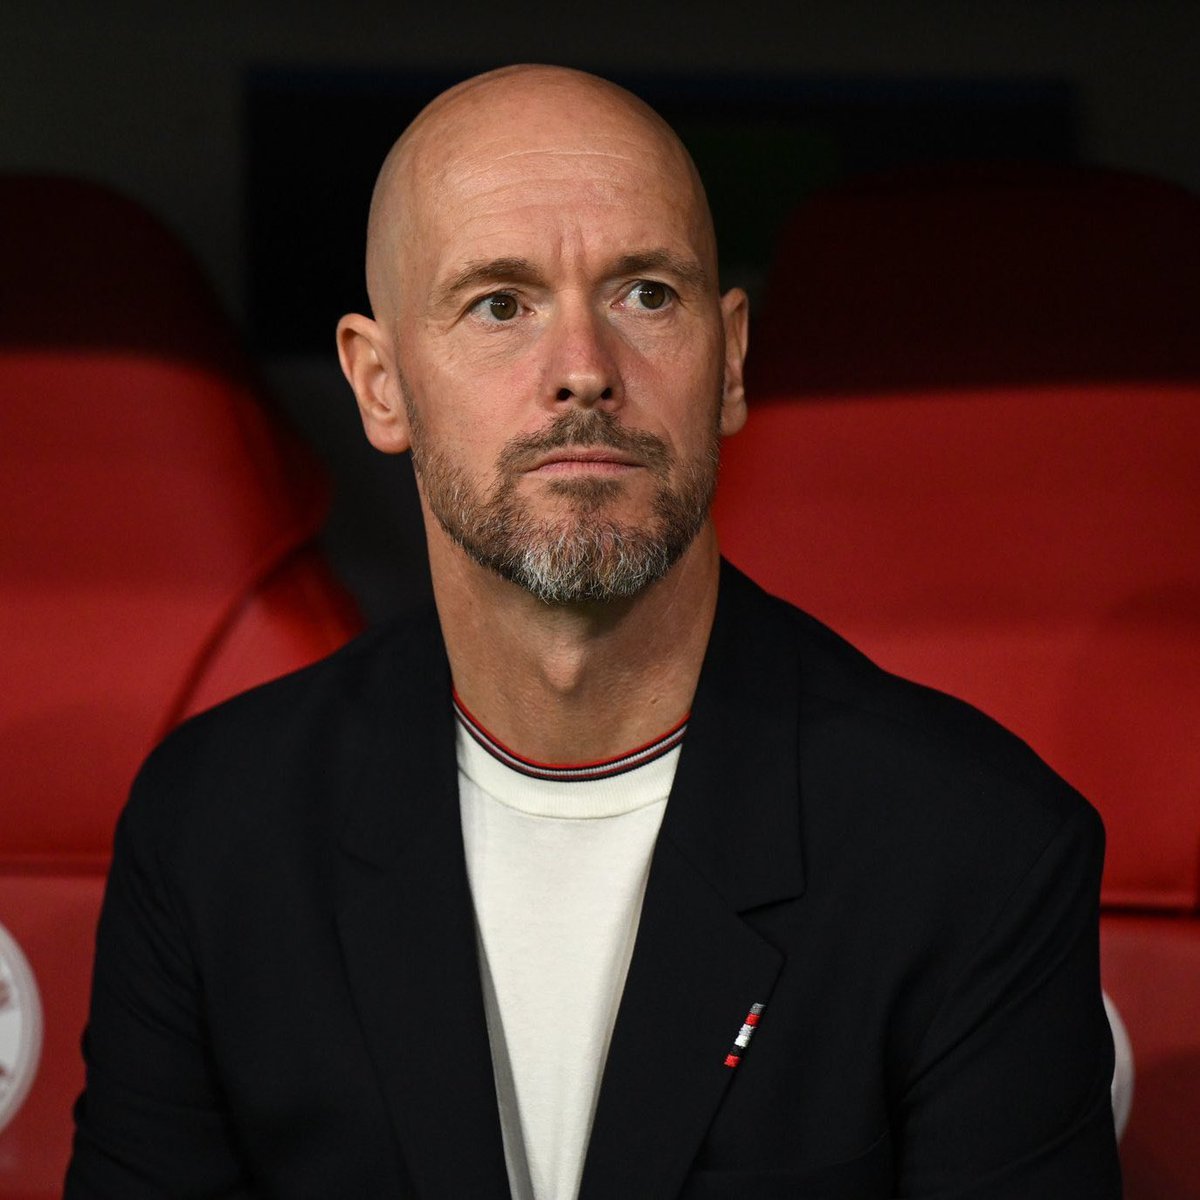 Ten Hag deserves to stay at Manchester United. Sacking him is a terrible decision.